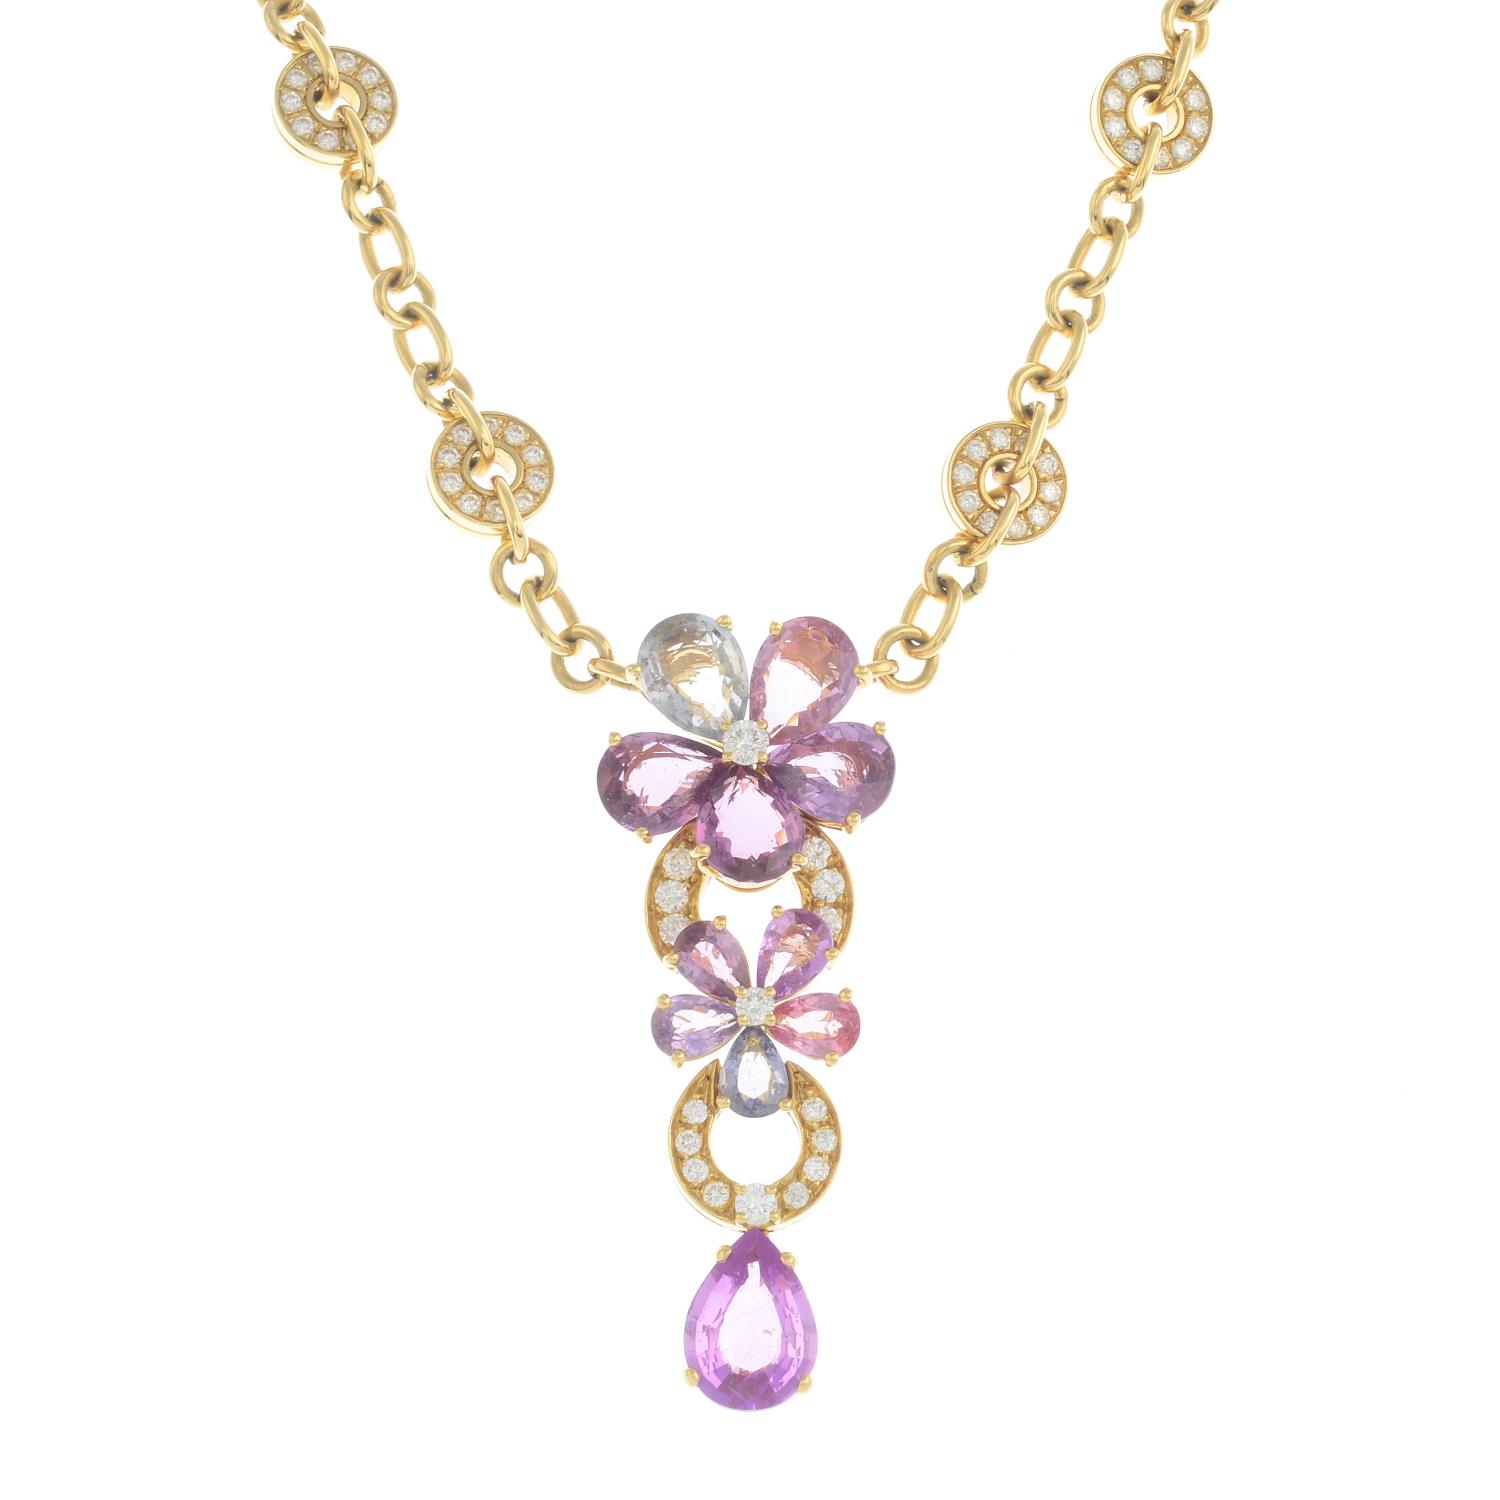 A limited edition diamond and vari-hue 'Sapphire Flower' necklace, - Image 5 of 5